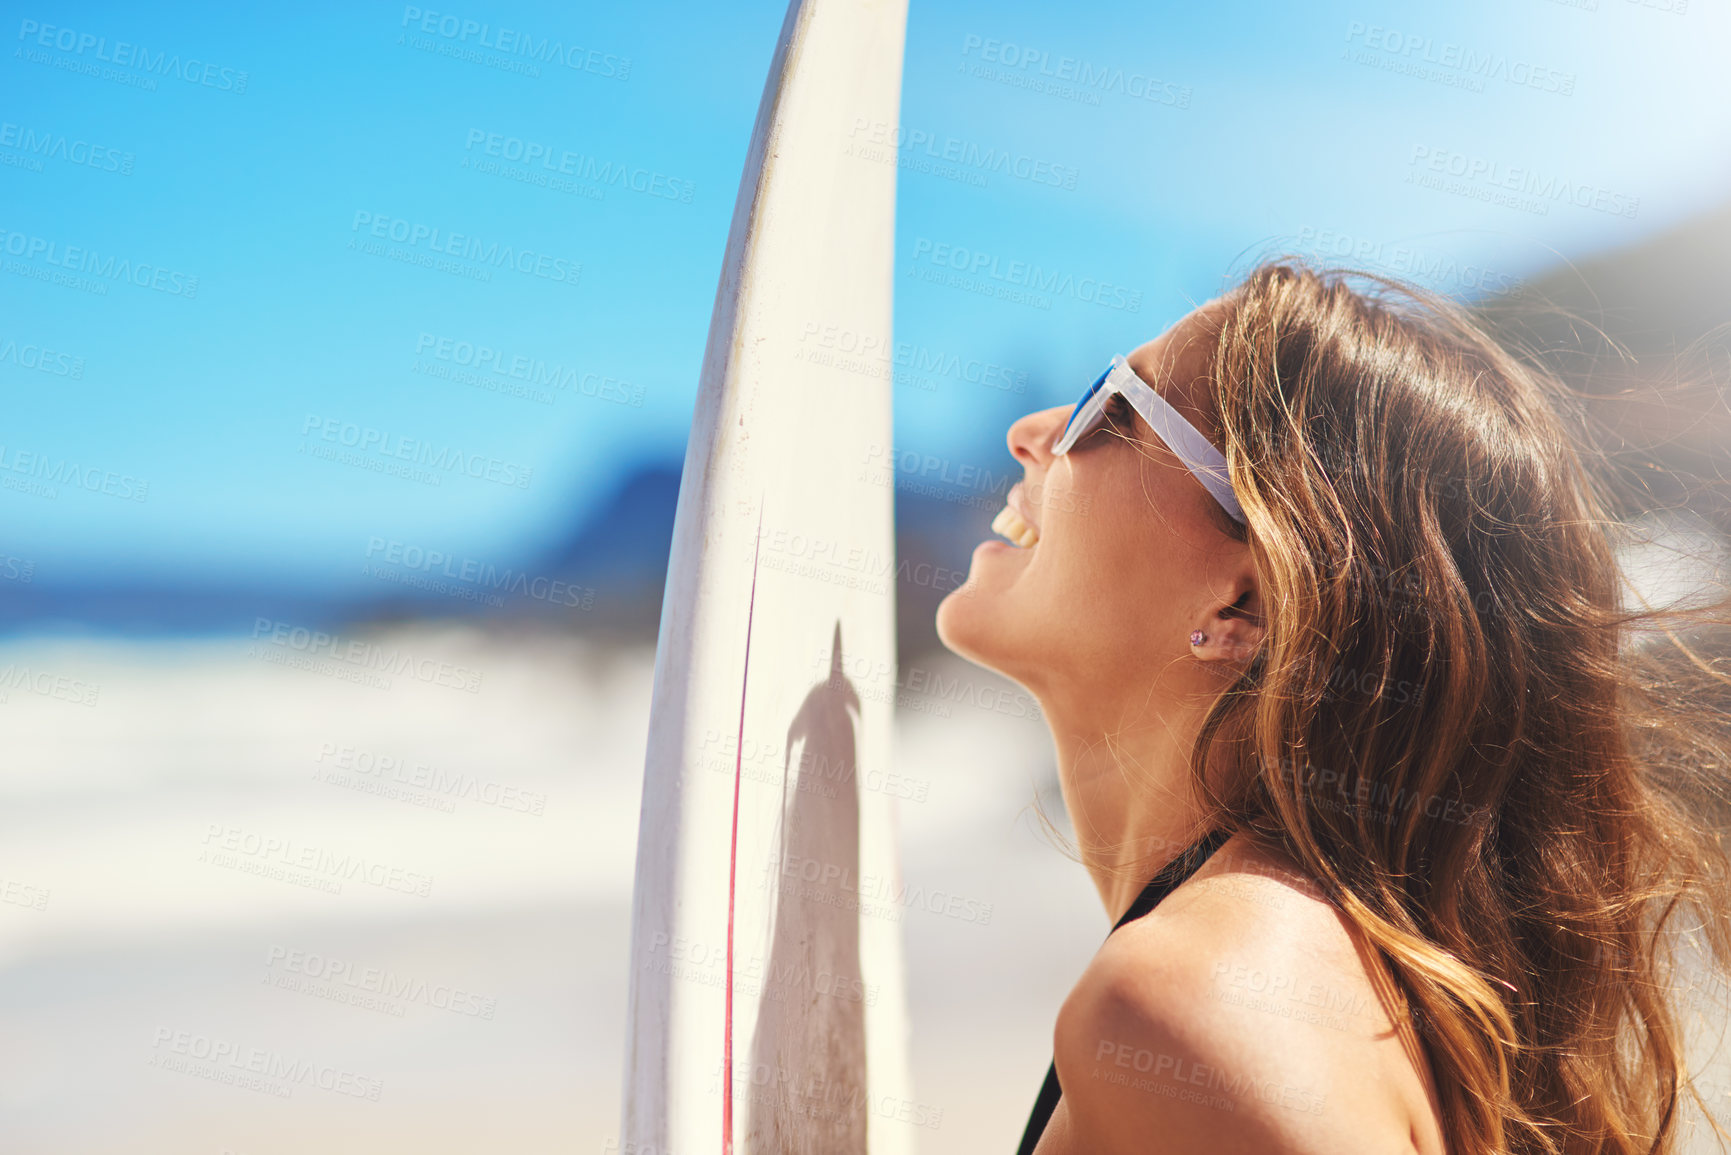 Buy stock photo Shot of a young surfer at the beach